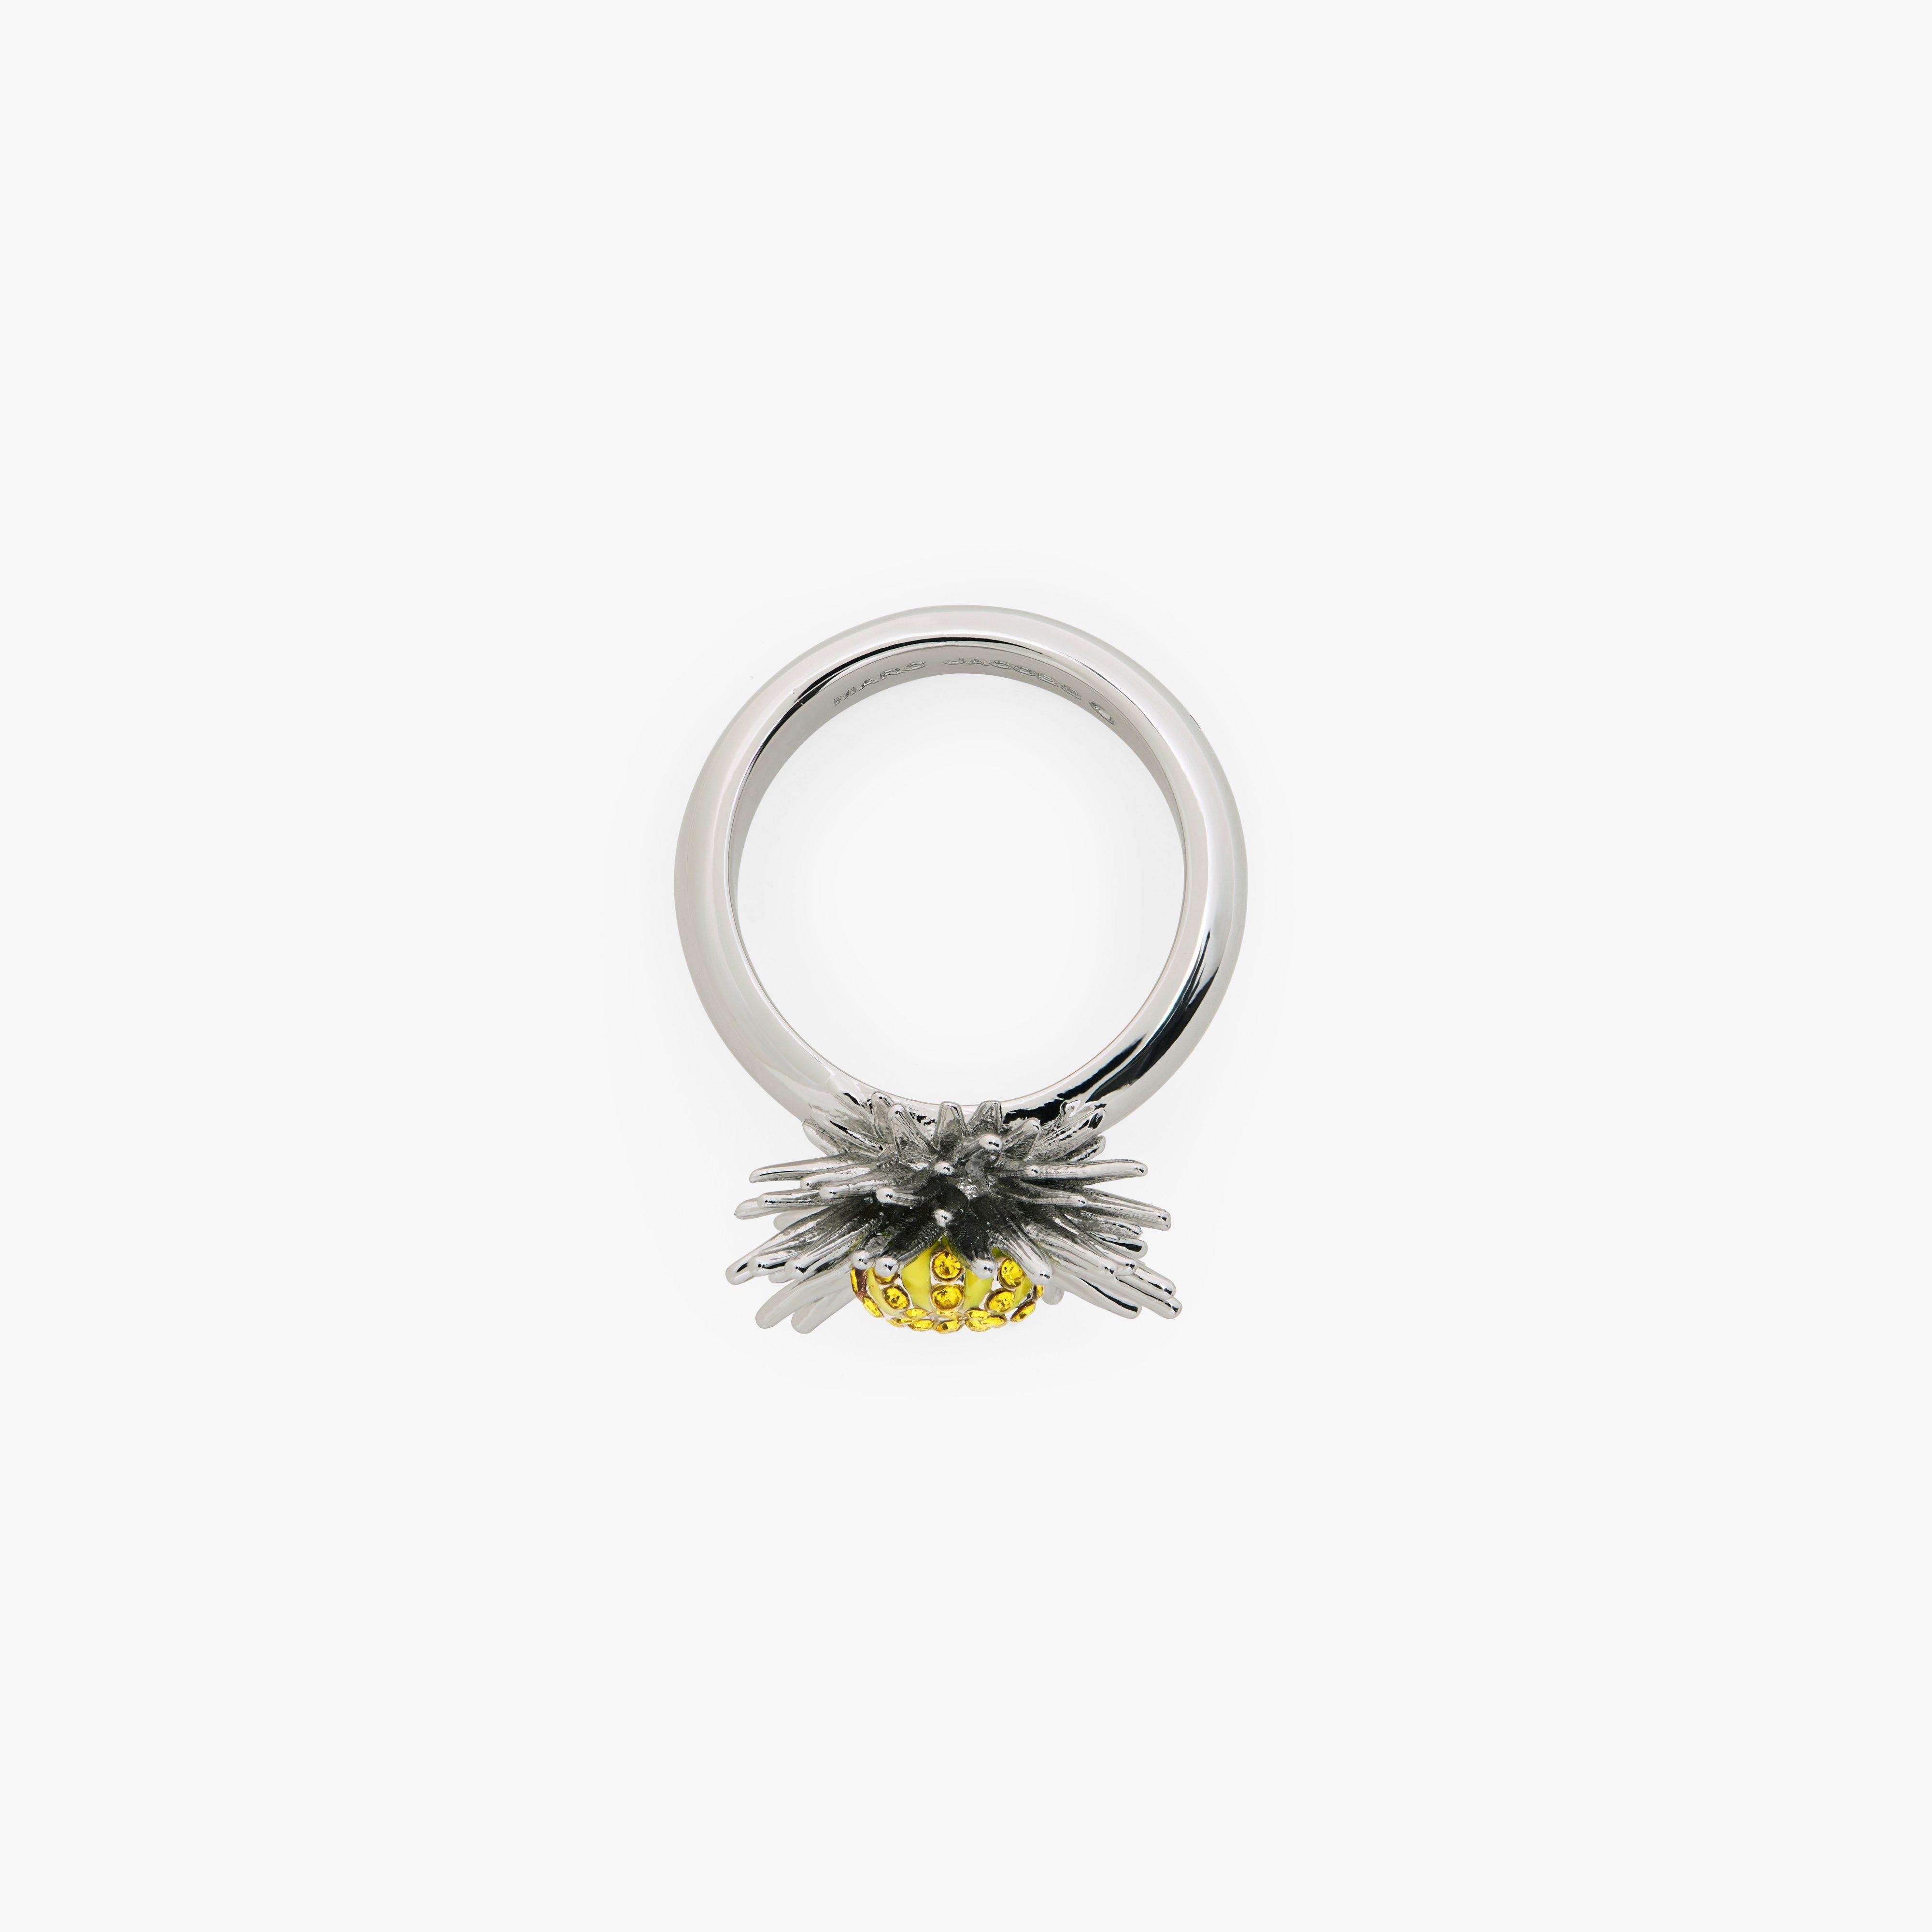 THE FUTURE FLORAL RING - 4